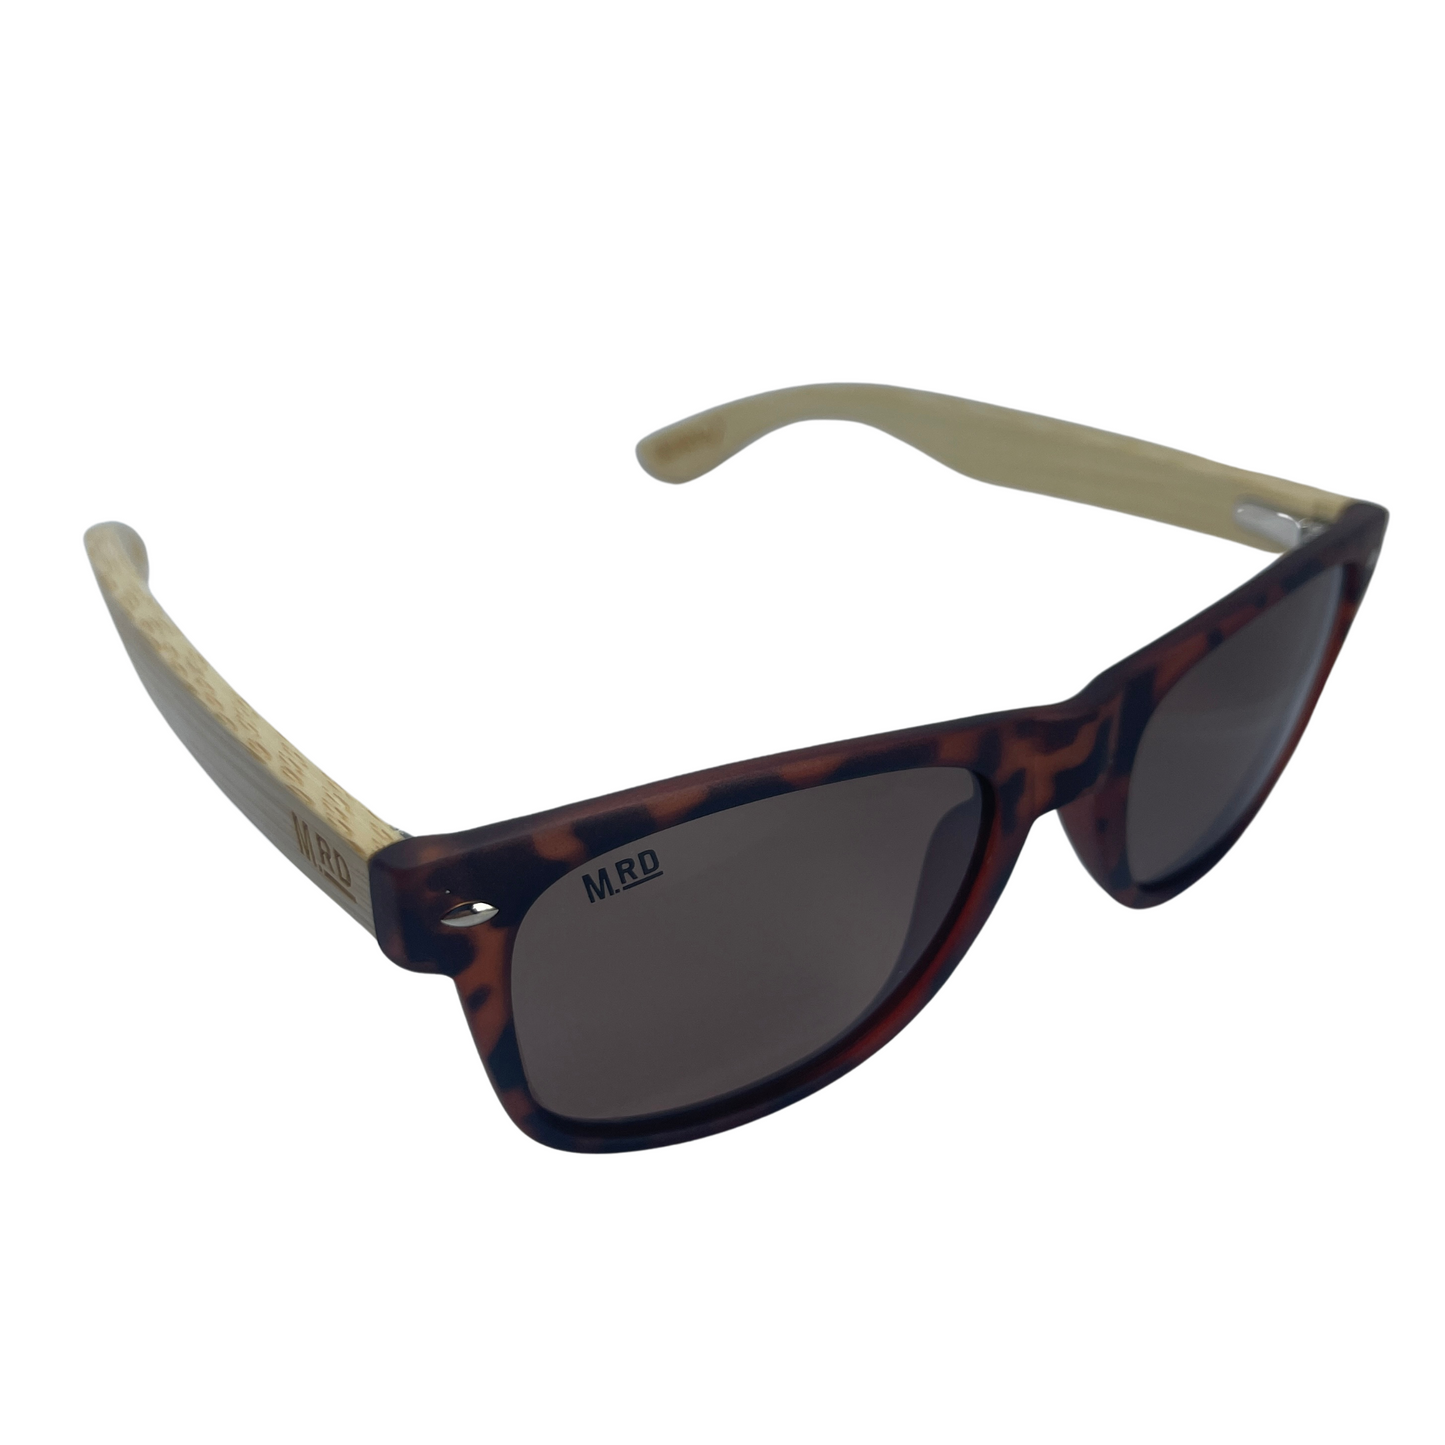 Sunglasses with brown tortoiseshell frames and wooden arms.